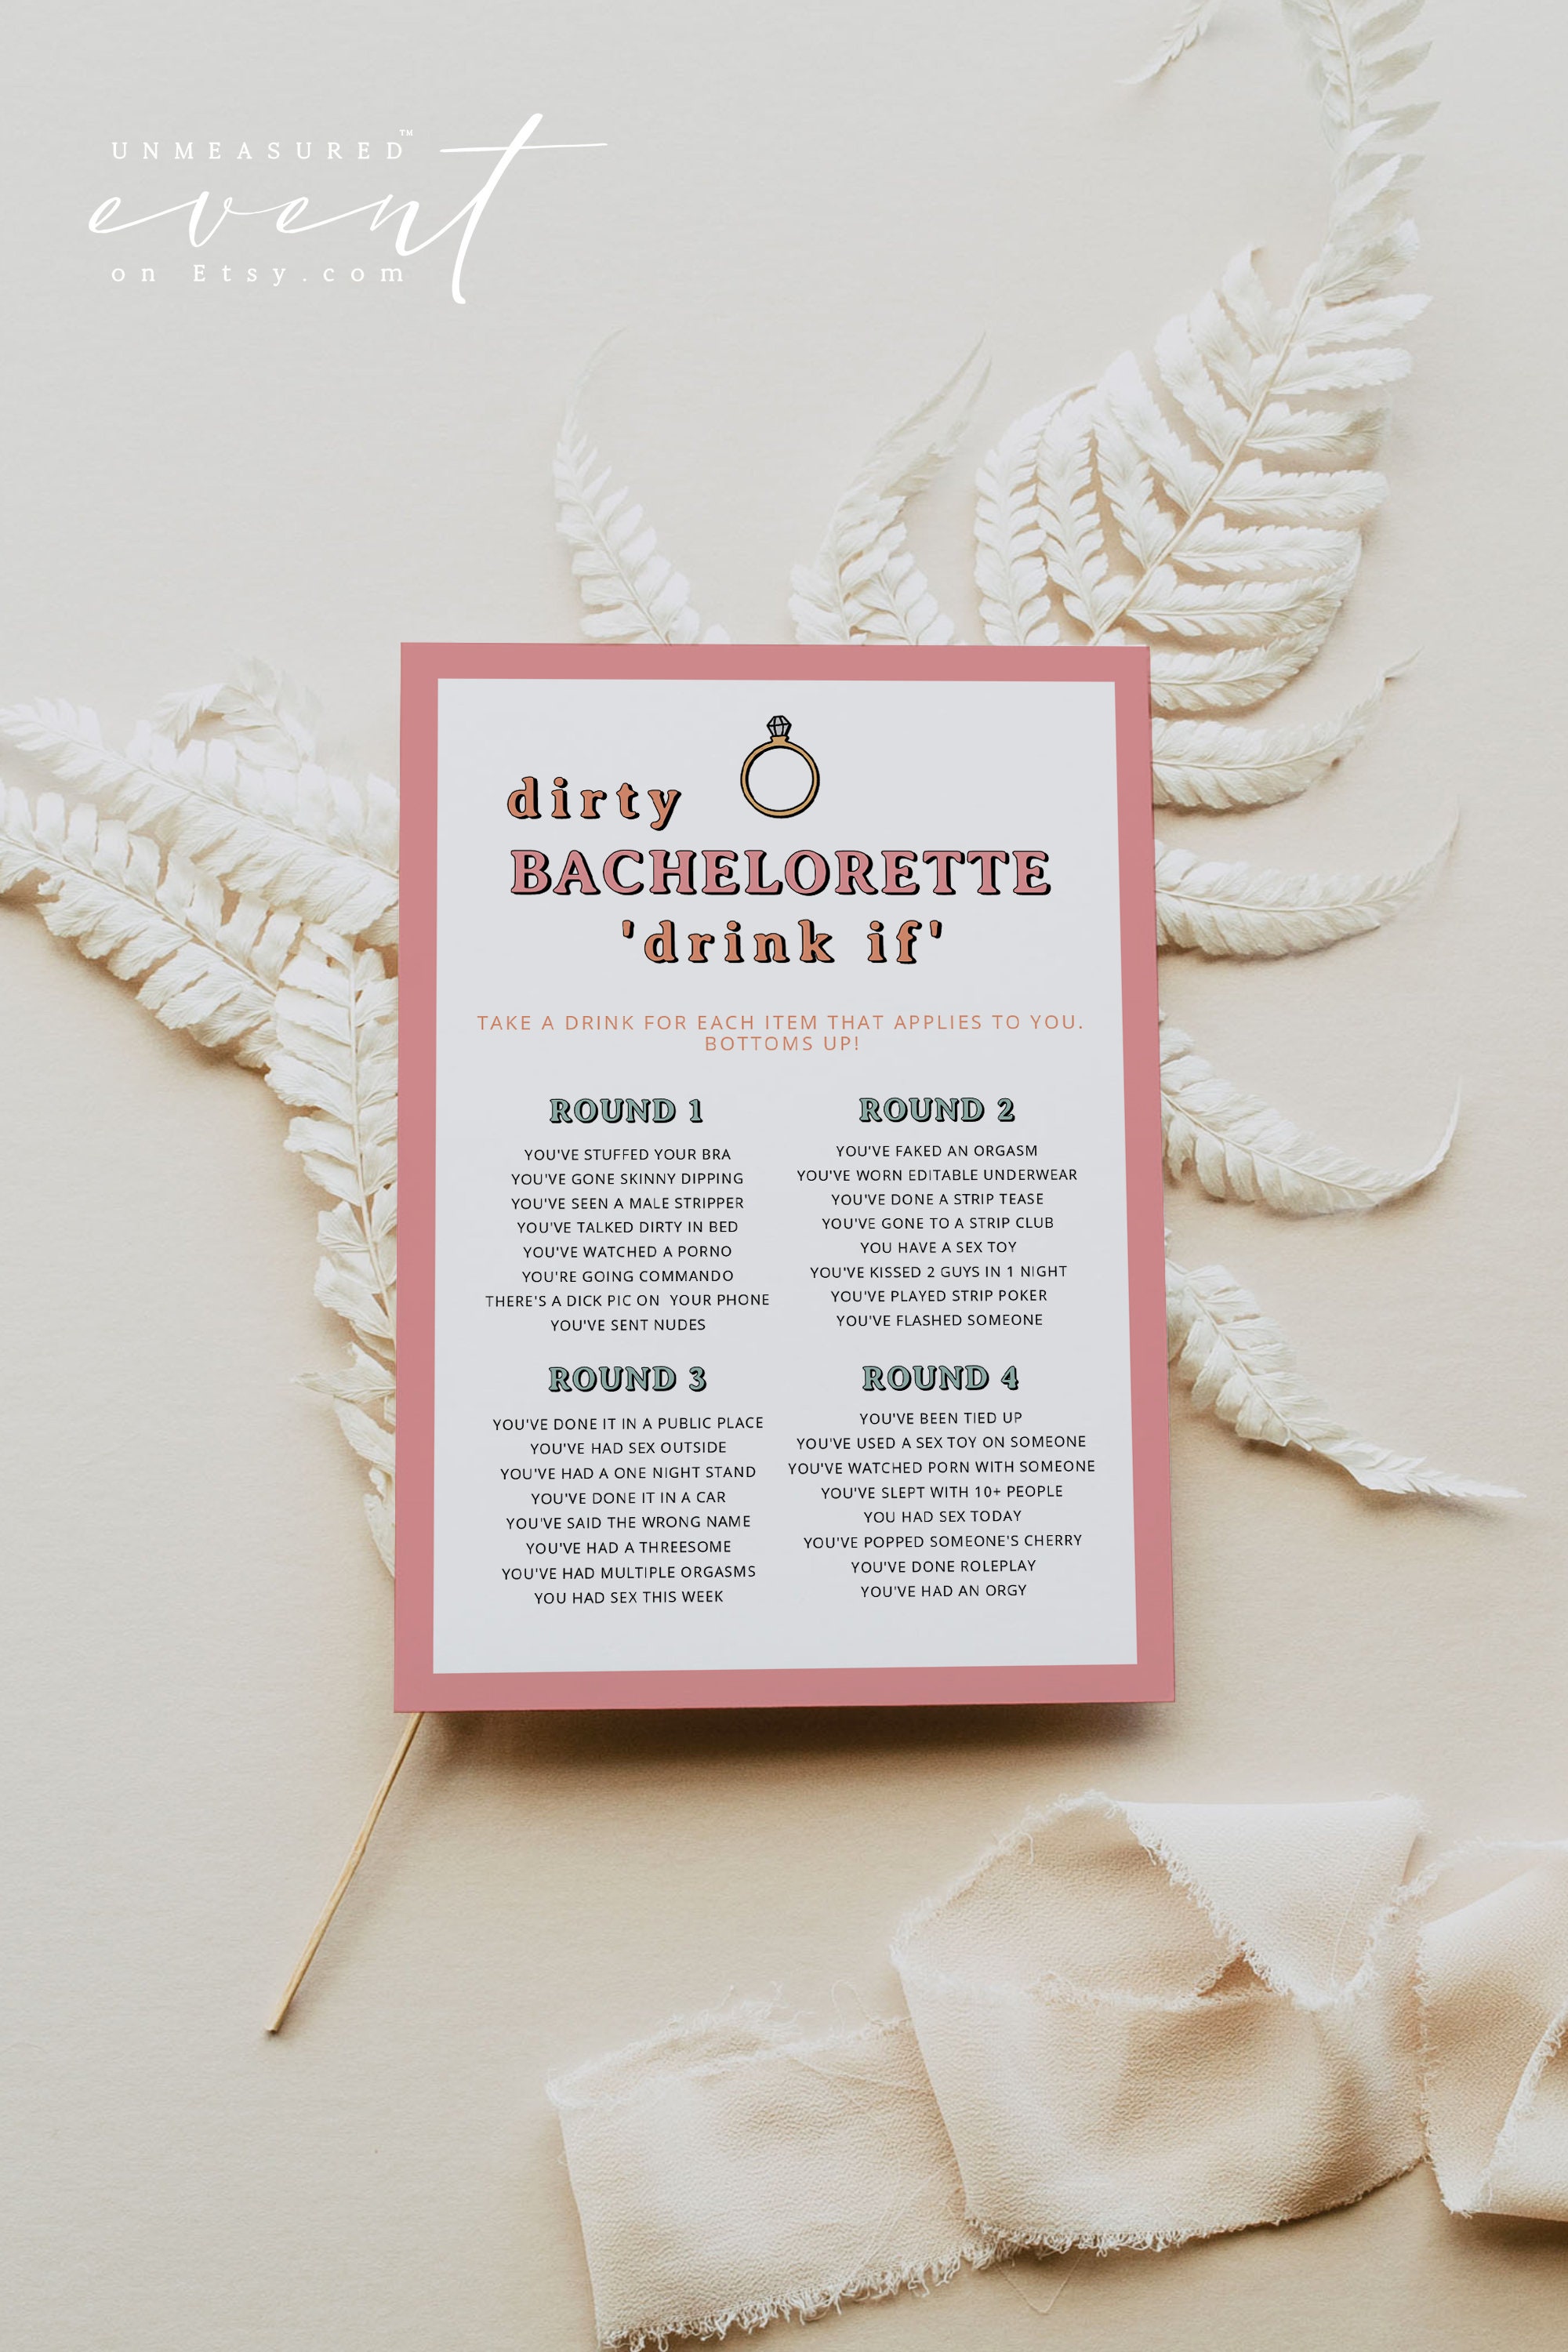 JEAN Dirty Drink If Bachelorette Game Printable Wife of